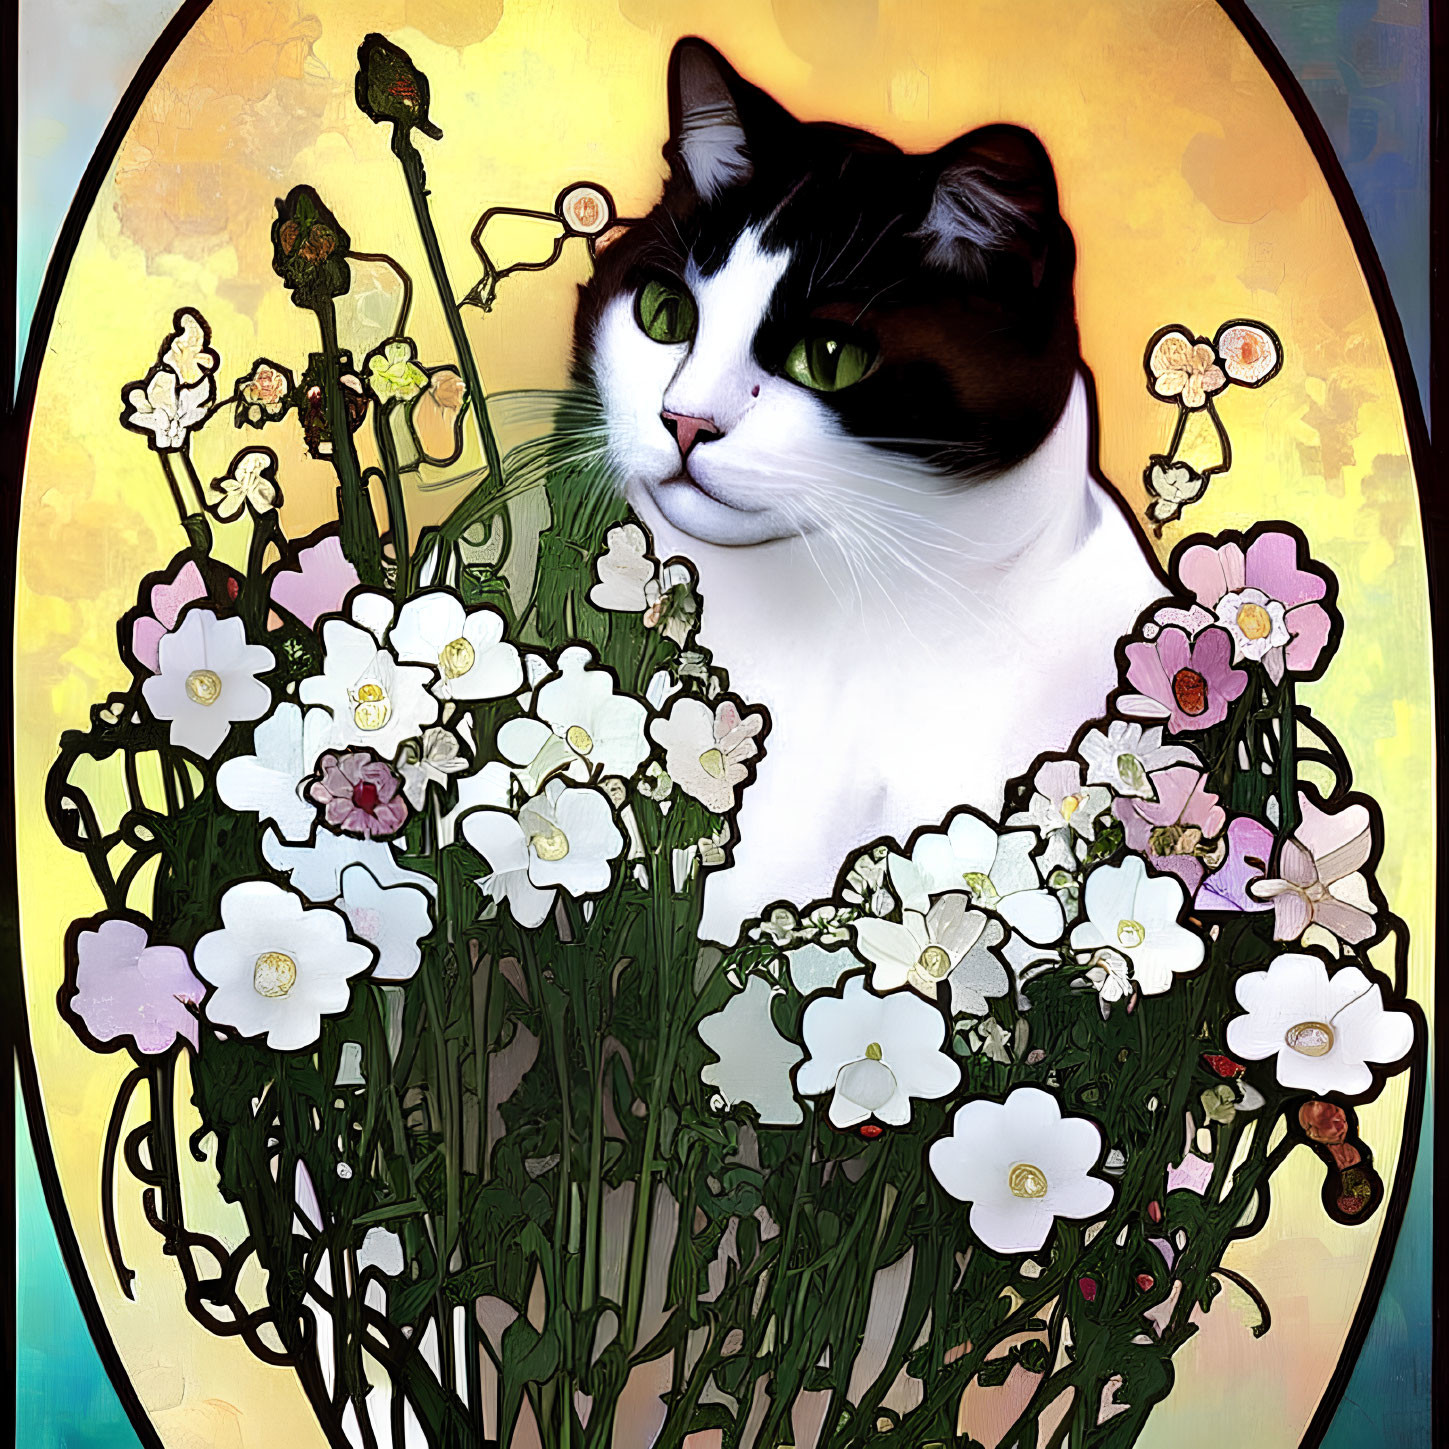 Stylized digital illustration of black and white cat in colorful floral setting